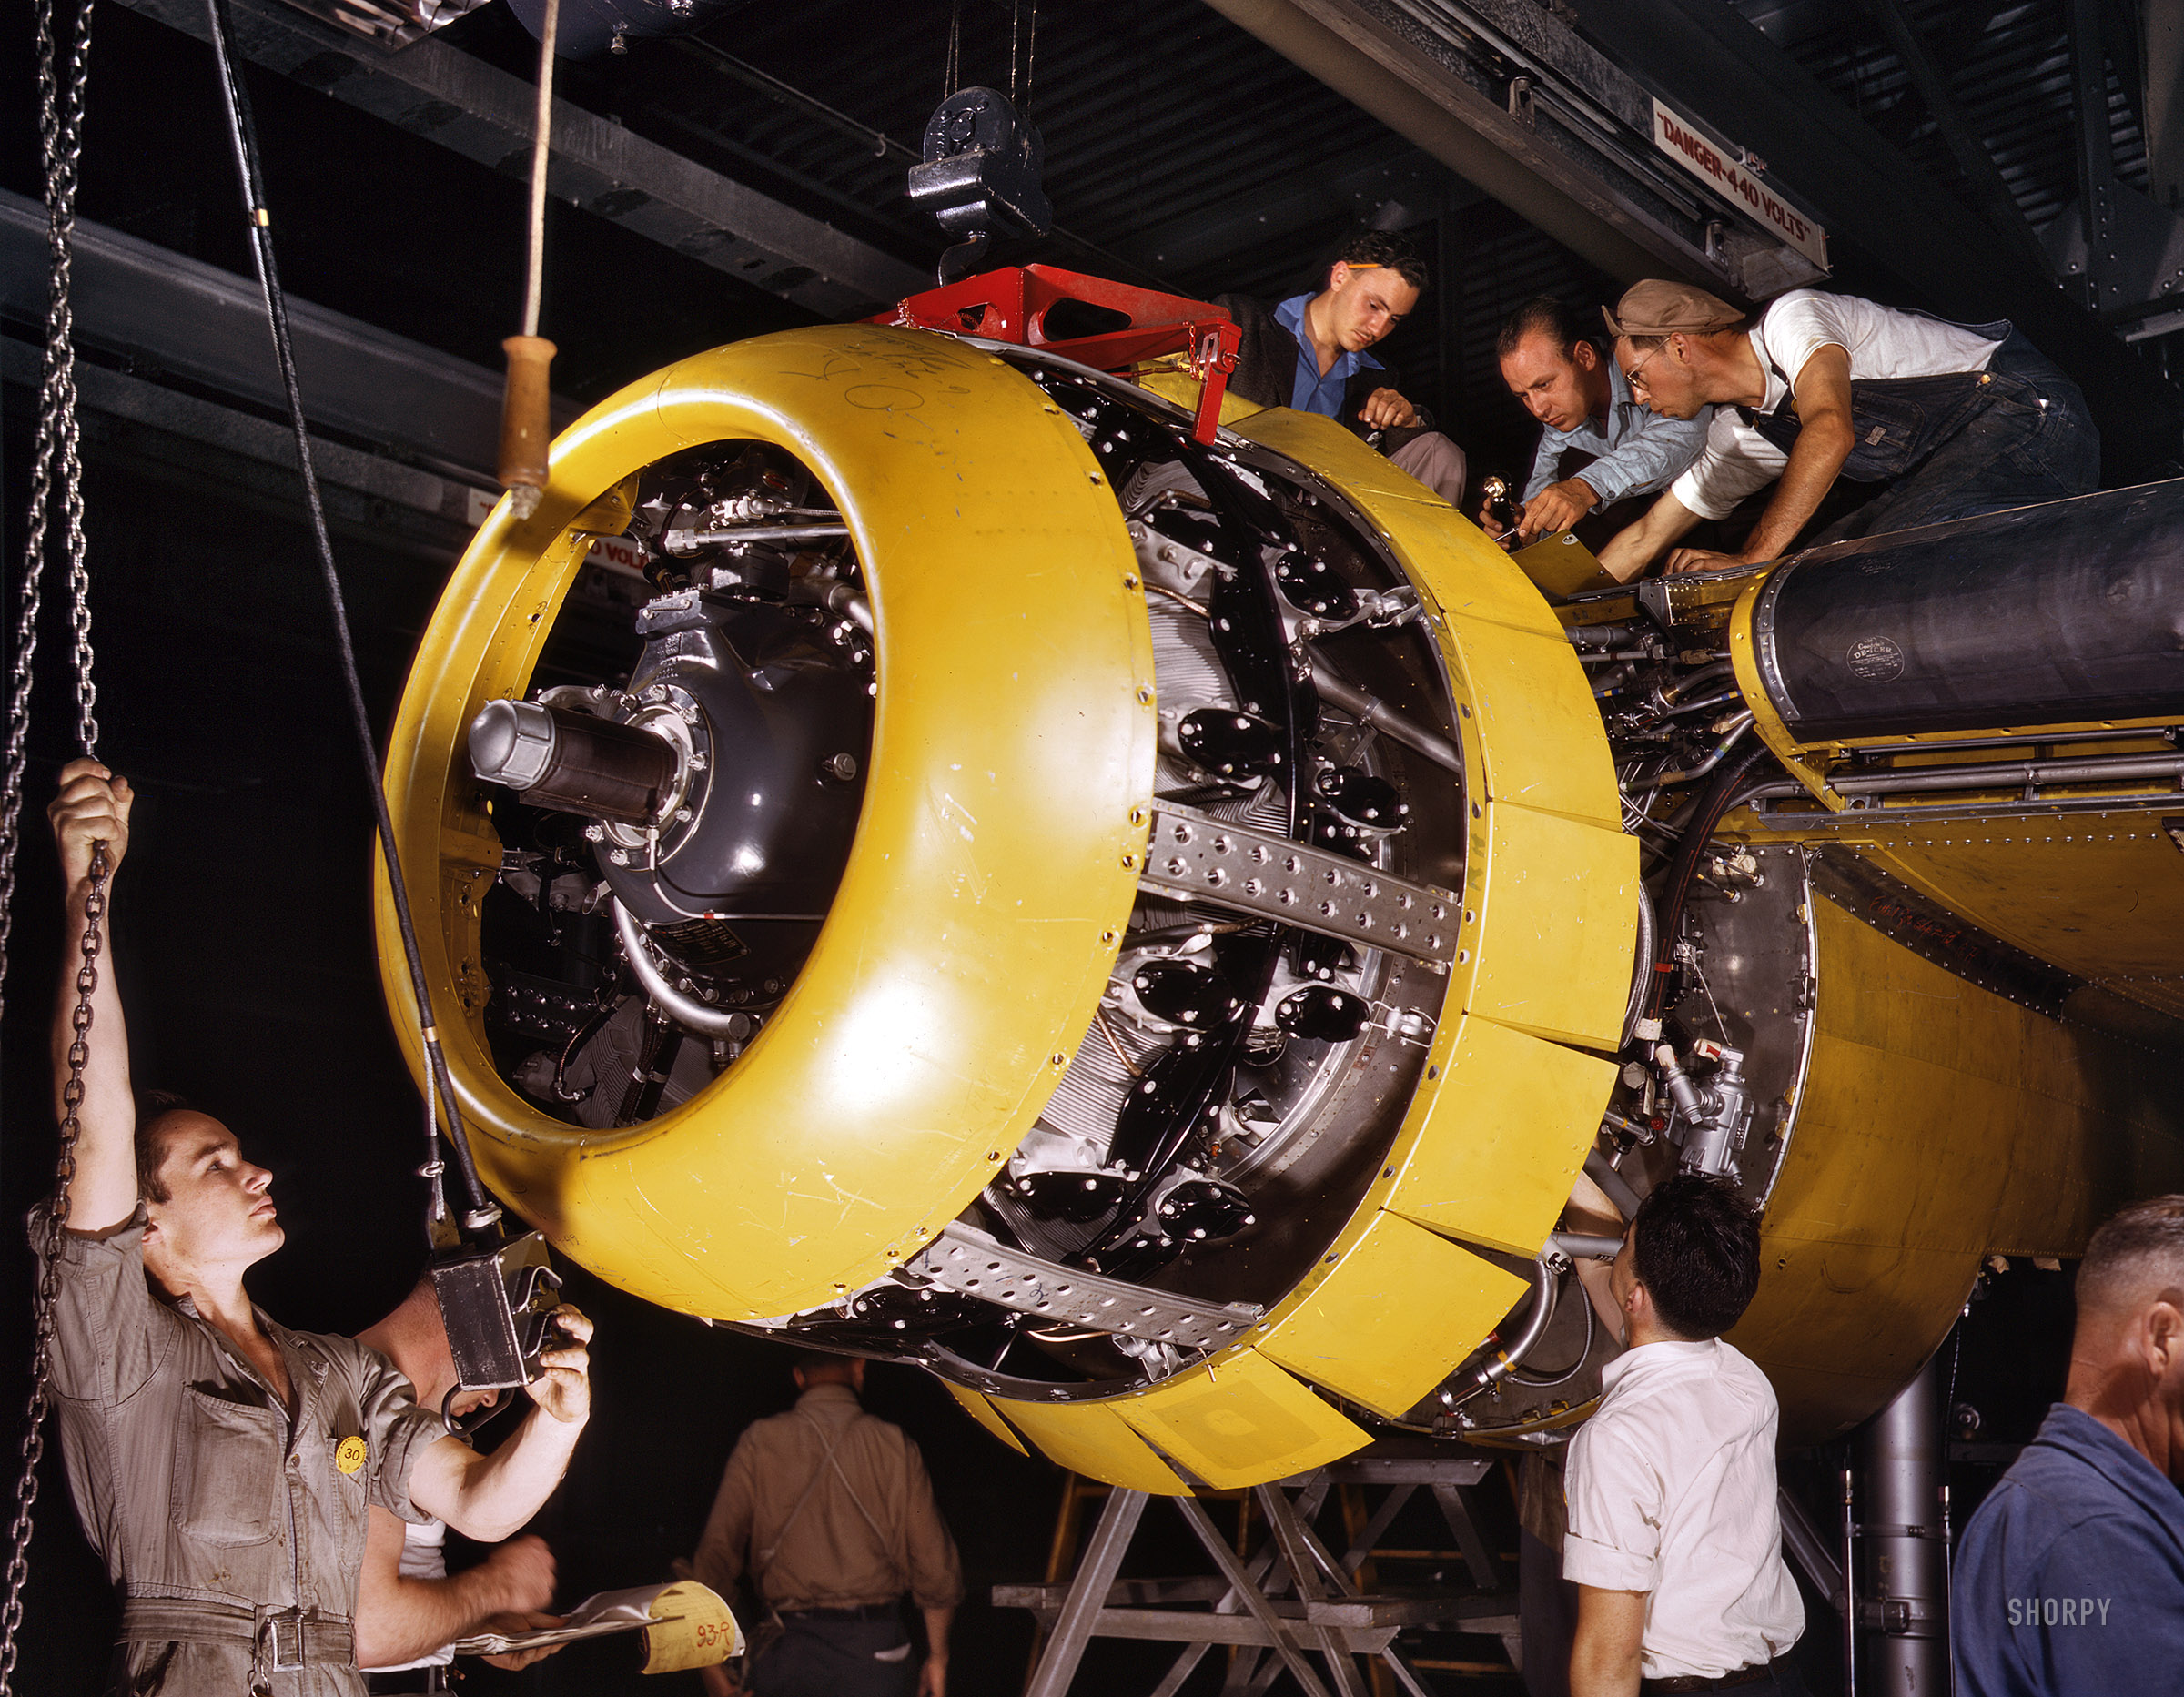 July 1942. "Production. B-25 bombers. Mounting a 1700-horsepower Wright Whirlwind engine to the firewall of a B-25 bomber. Fairfax bomber plant, Kansas City." 4x5 Kodachrome transparency by Alfred Palmer. View full size.